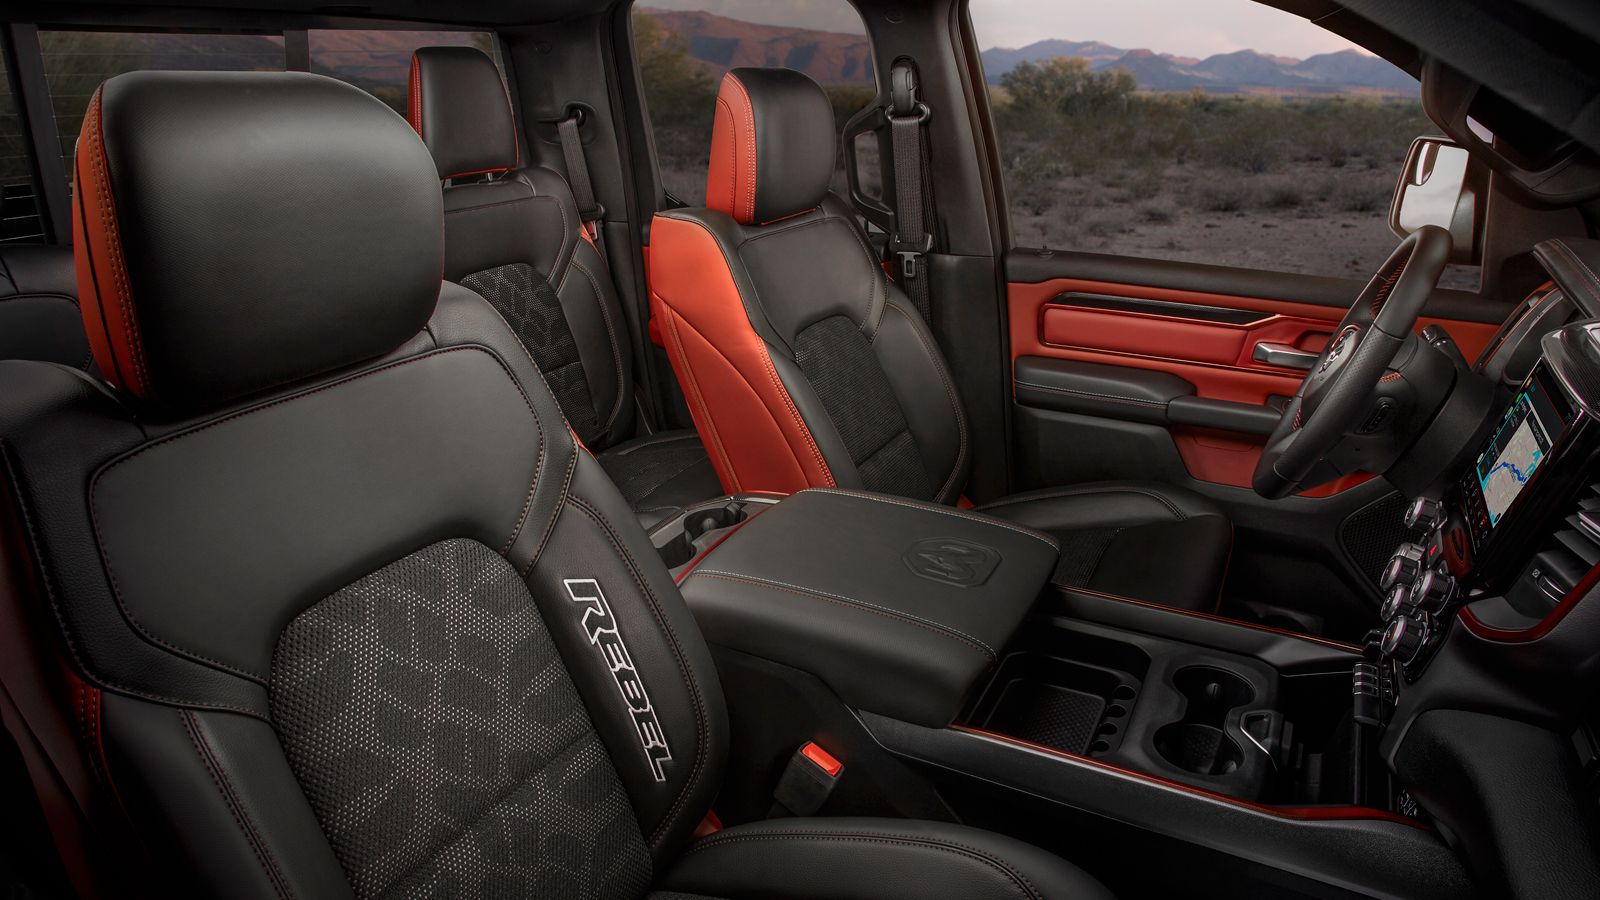 2020 Ram 1500 Interior With Rebel Limited Laramie And Longhorn